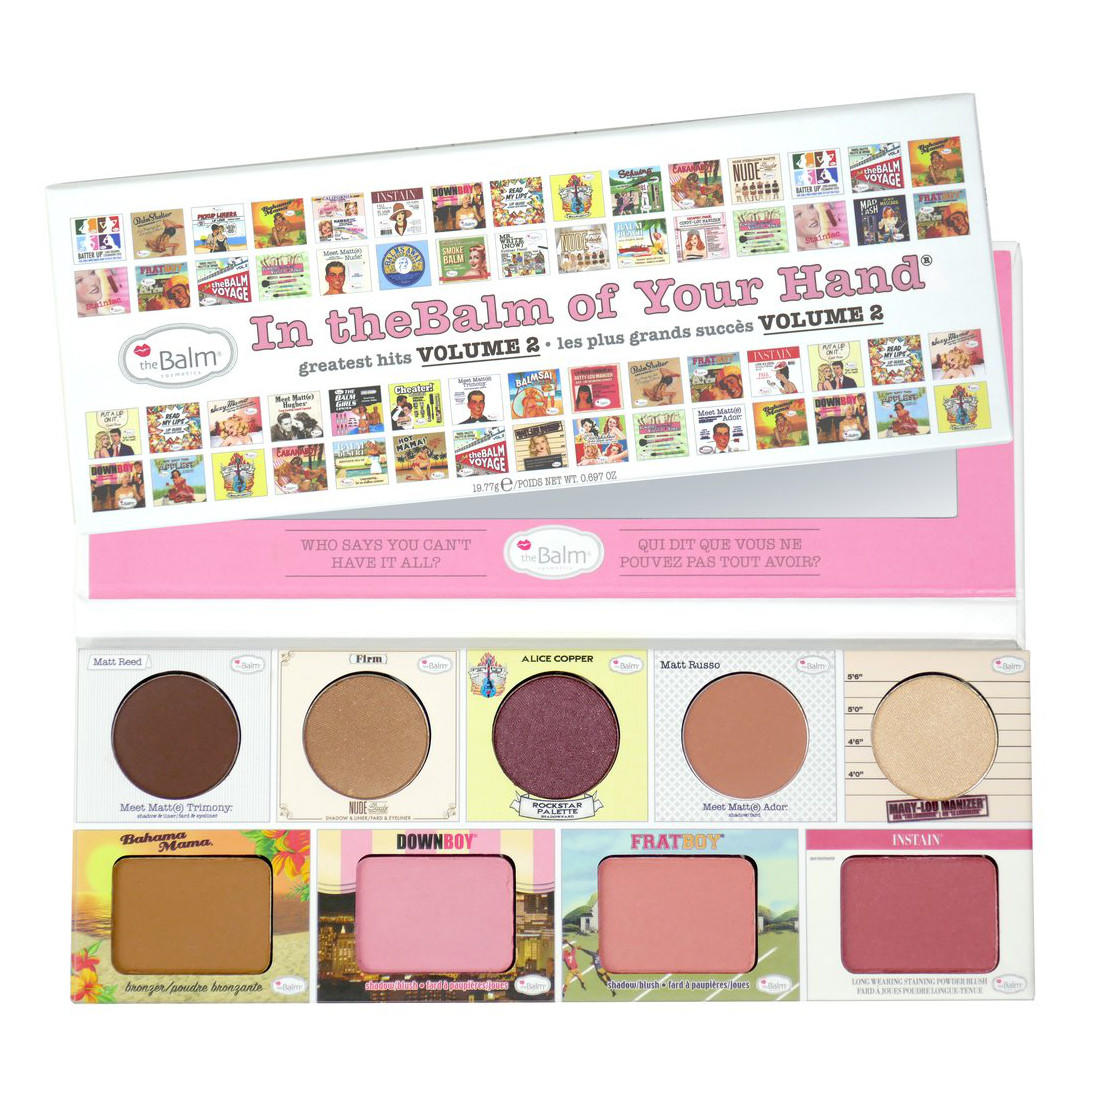 The Balm In The Balm Of Your Hand Greatest Hits Palette Vol 2.